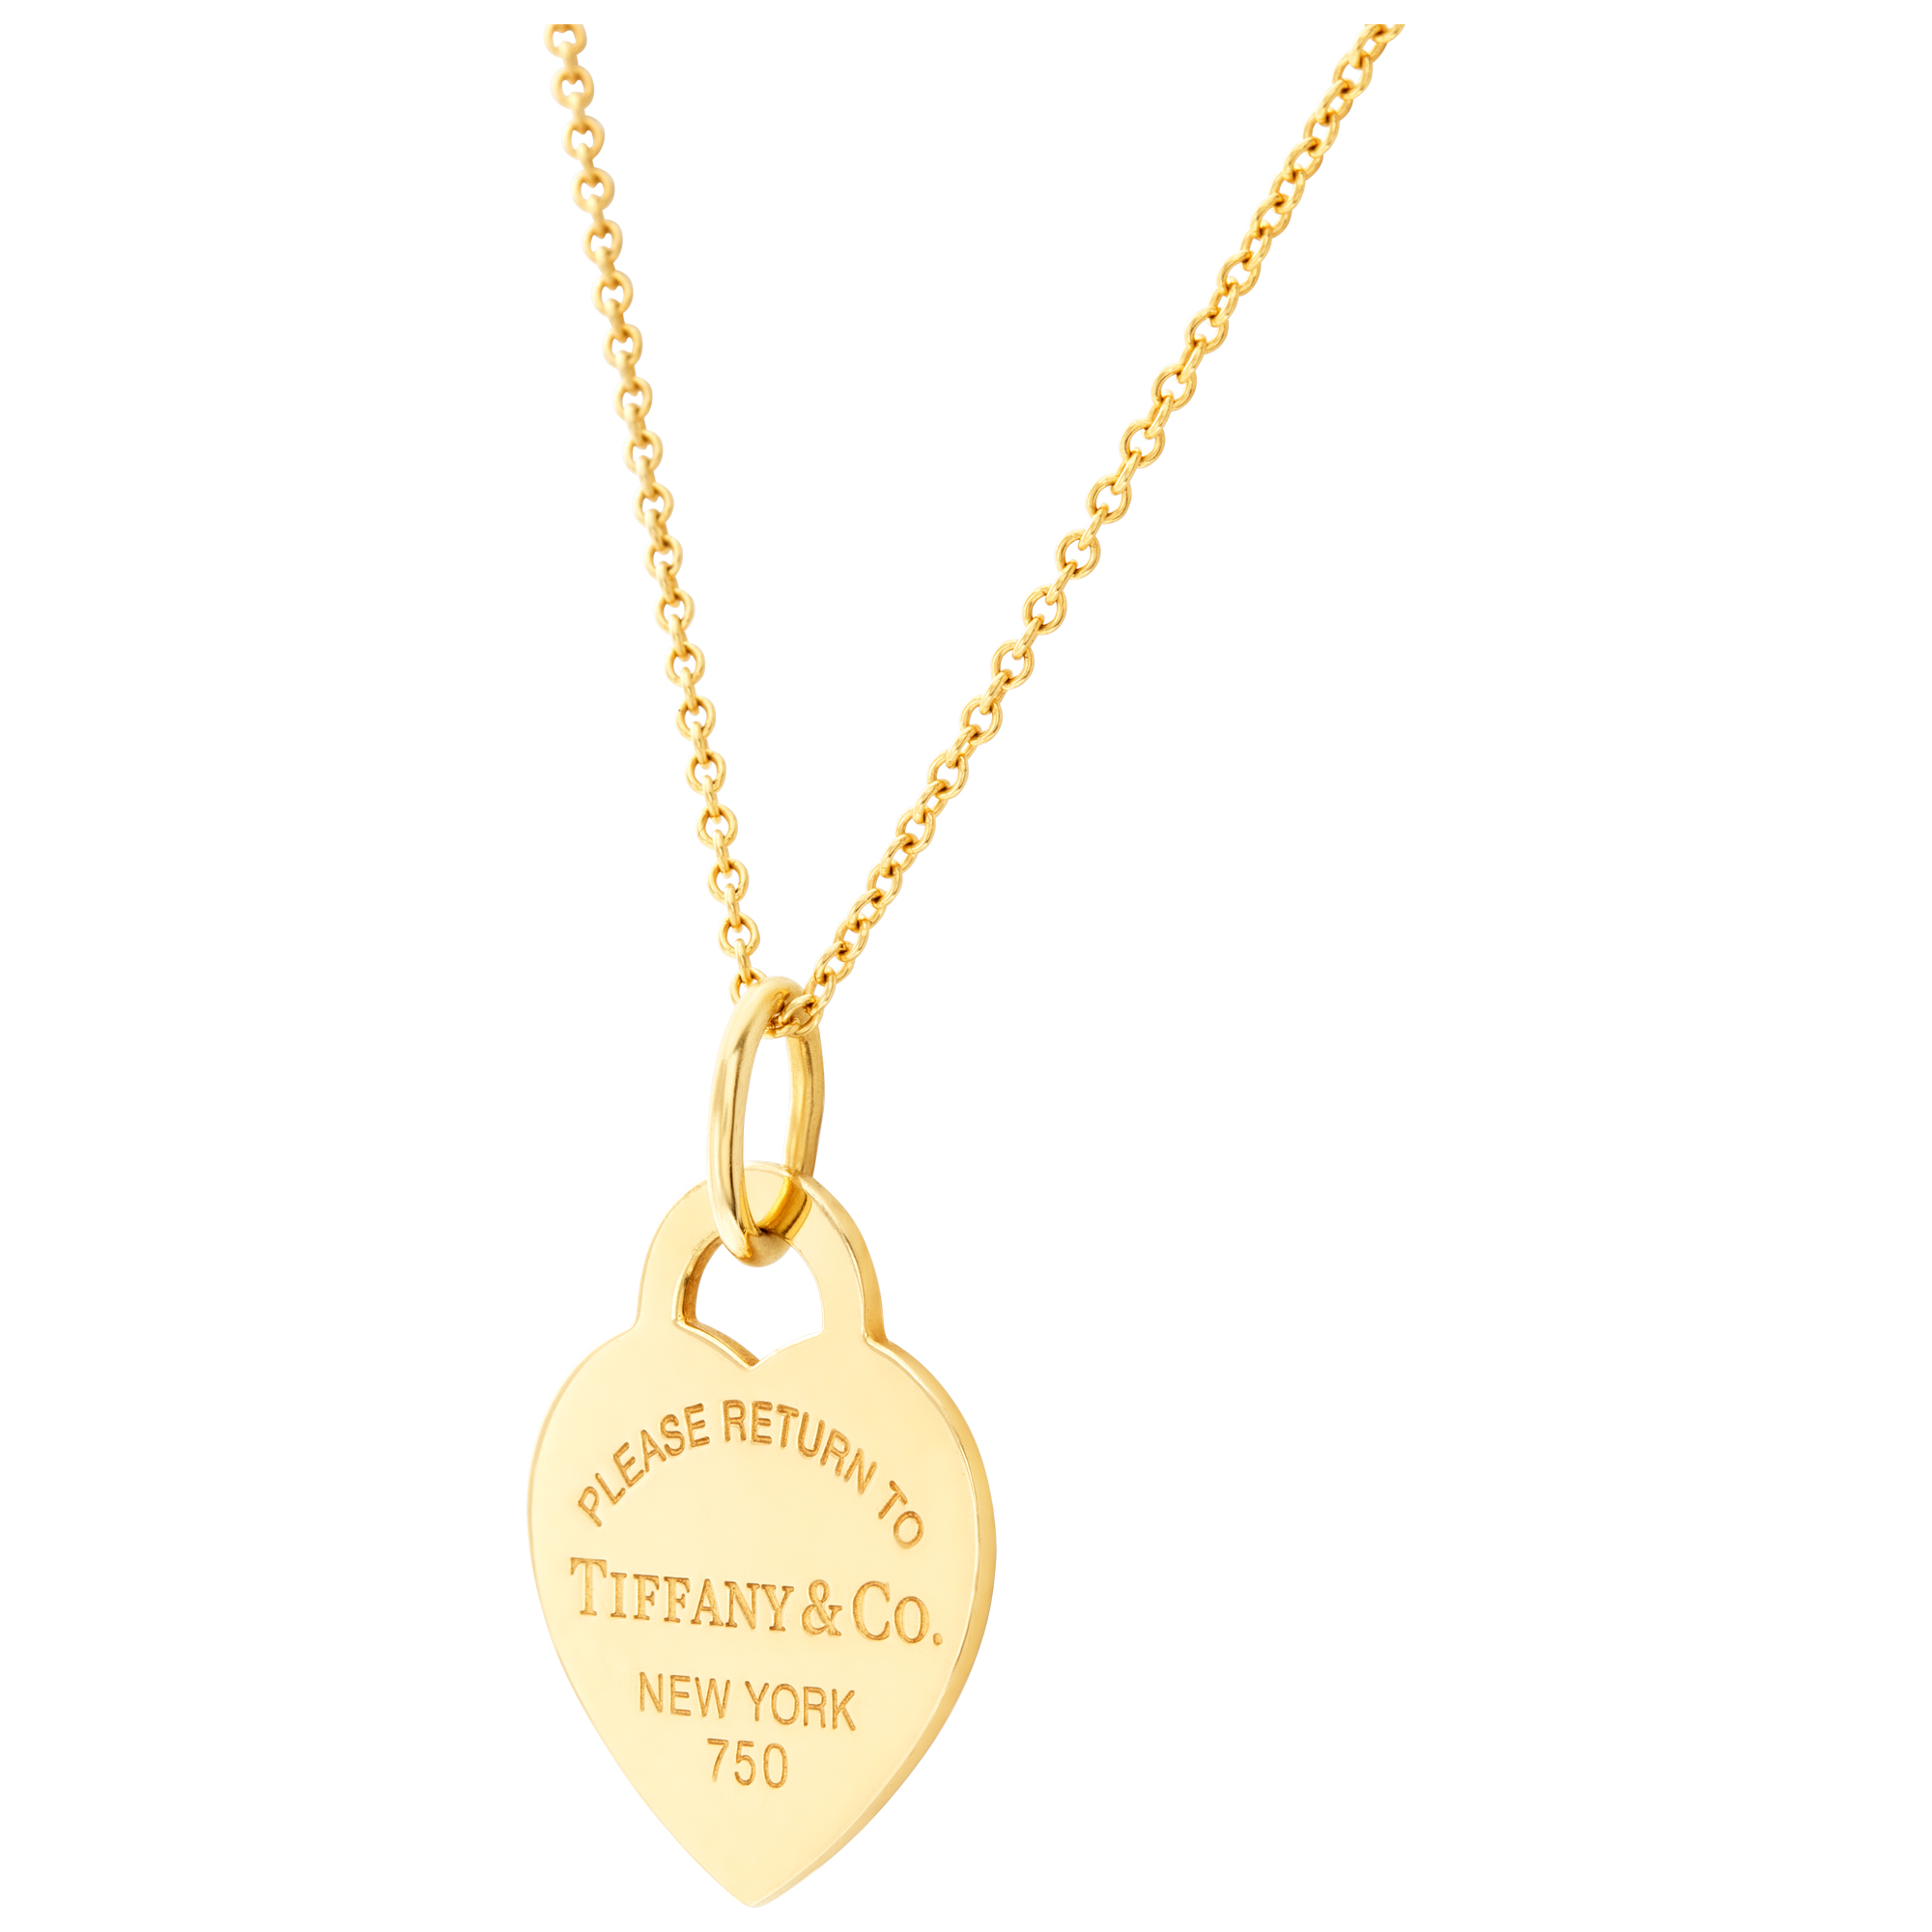 Tiffany & Co. 18k yellow gold "Return To Tiffany" chain and heart shaped pendant image 1